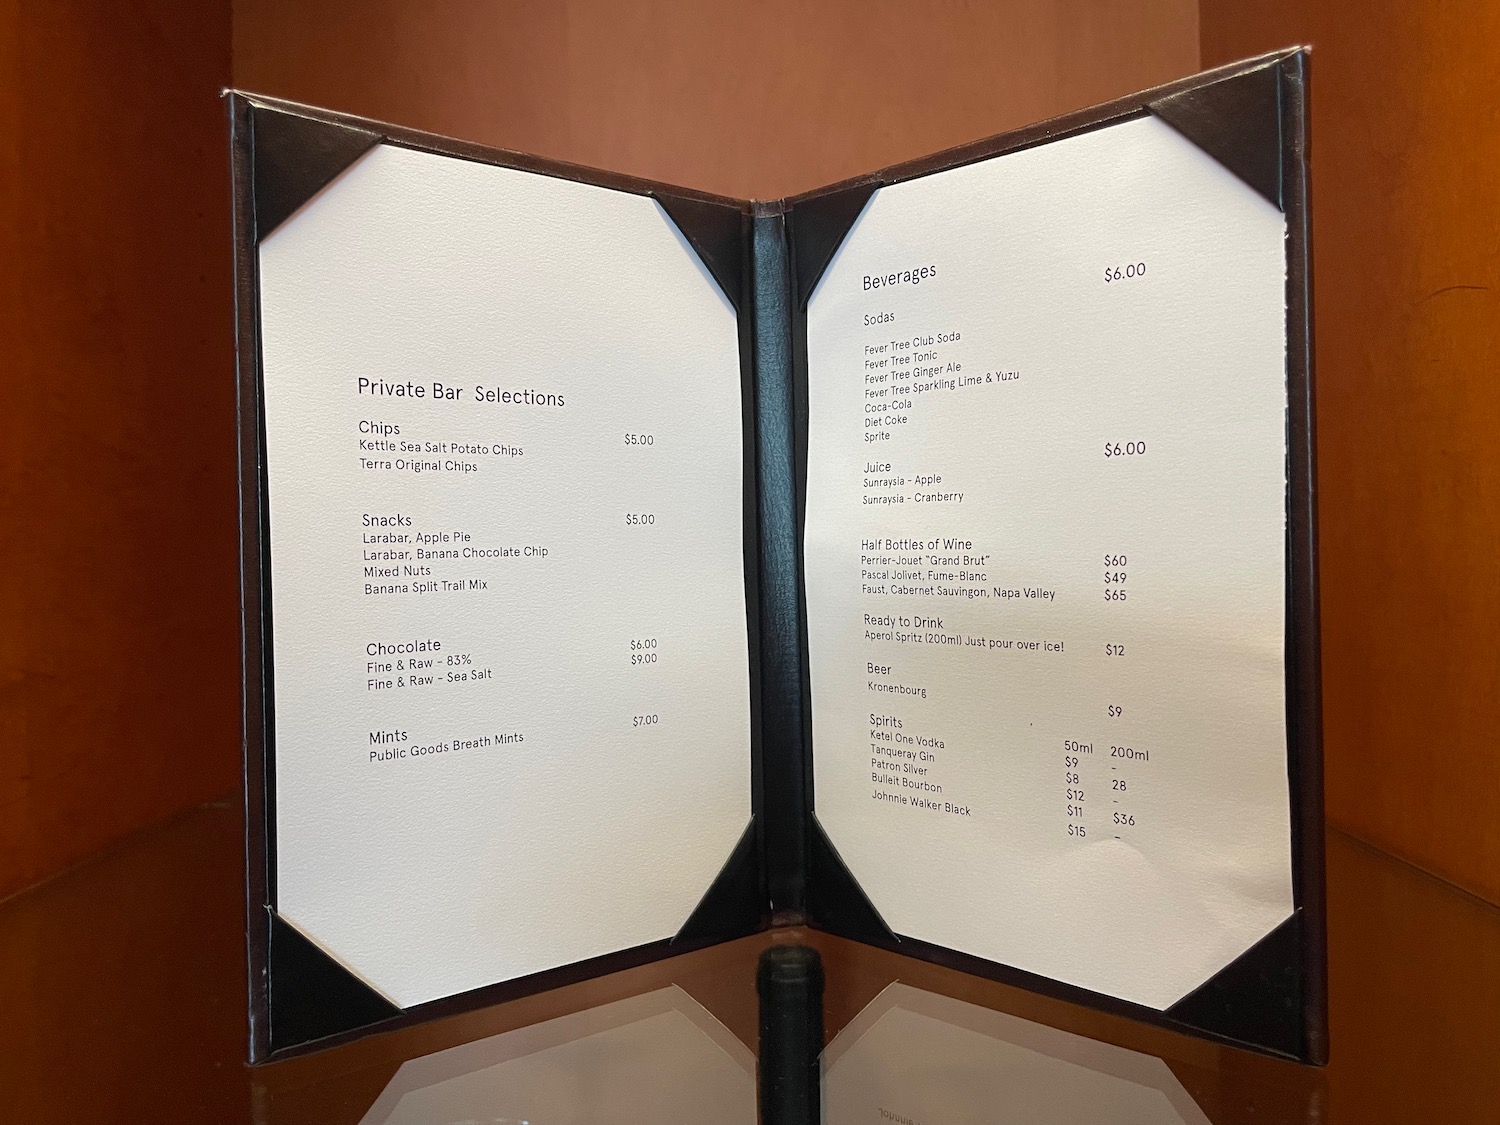 a menu with a black and white cover